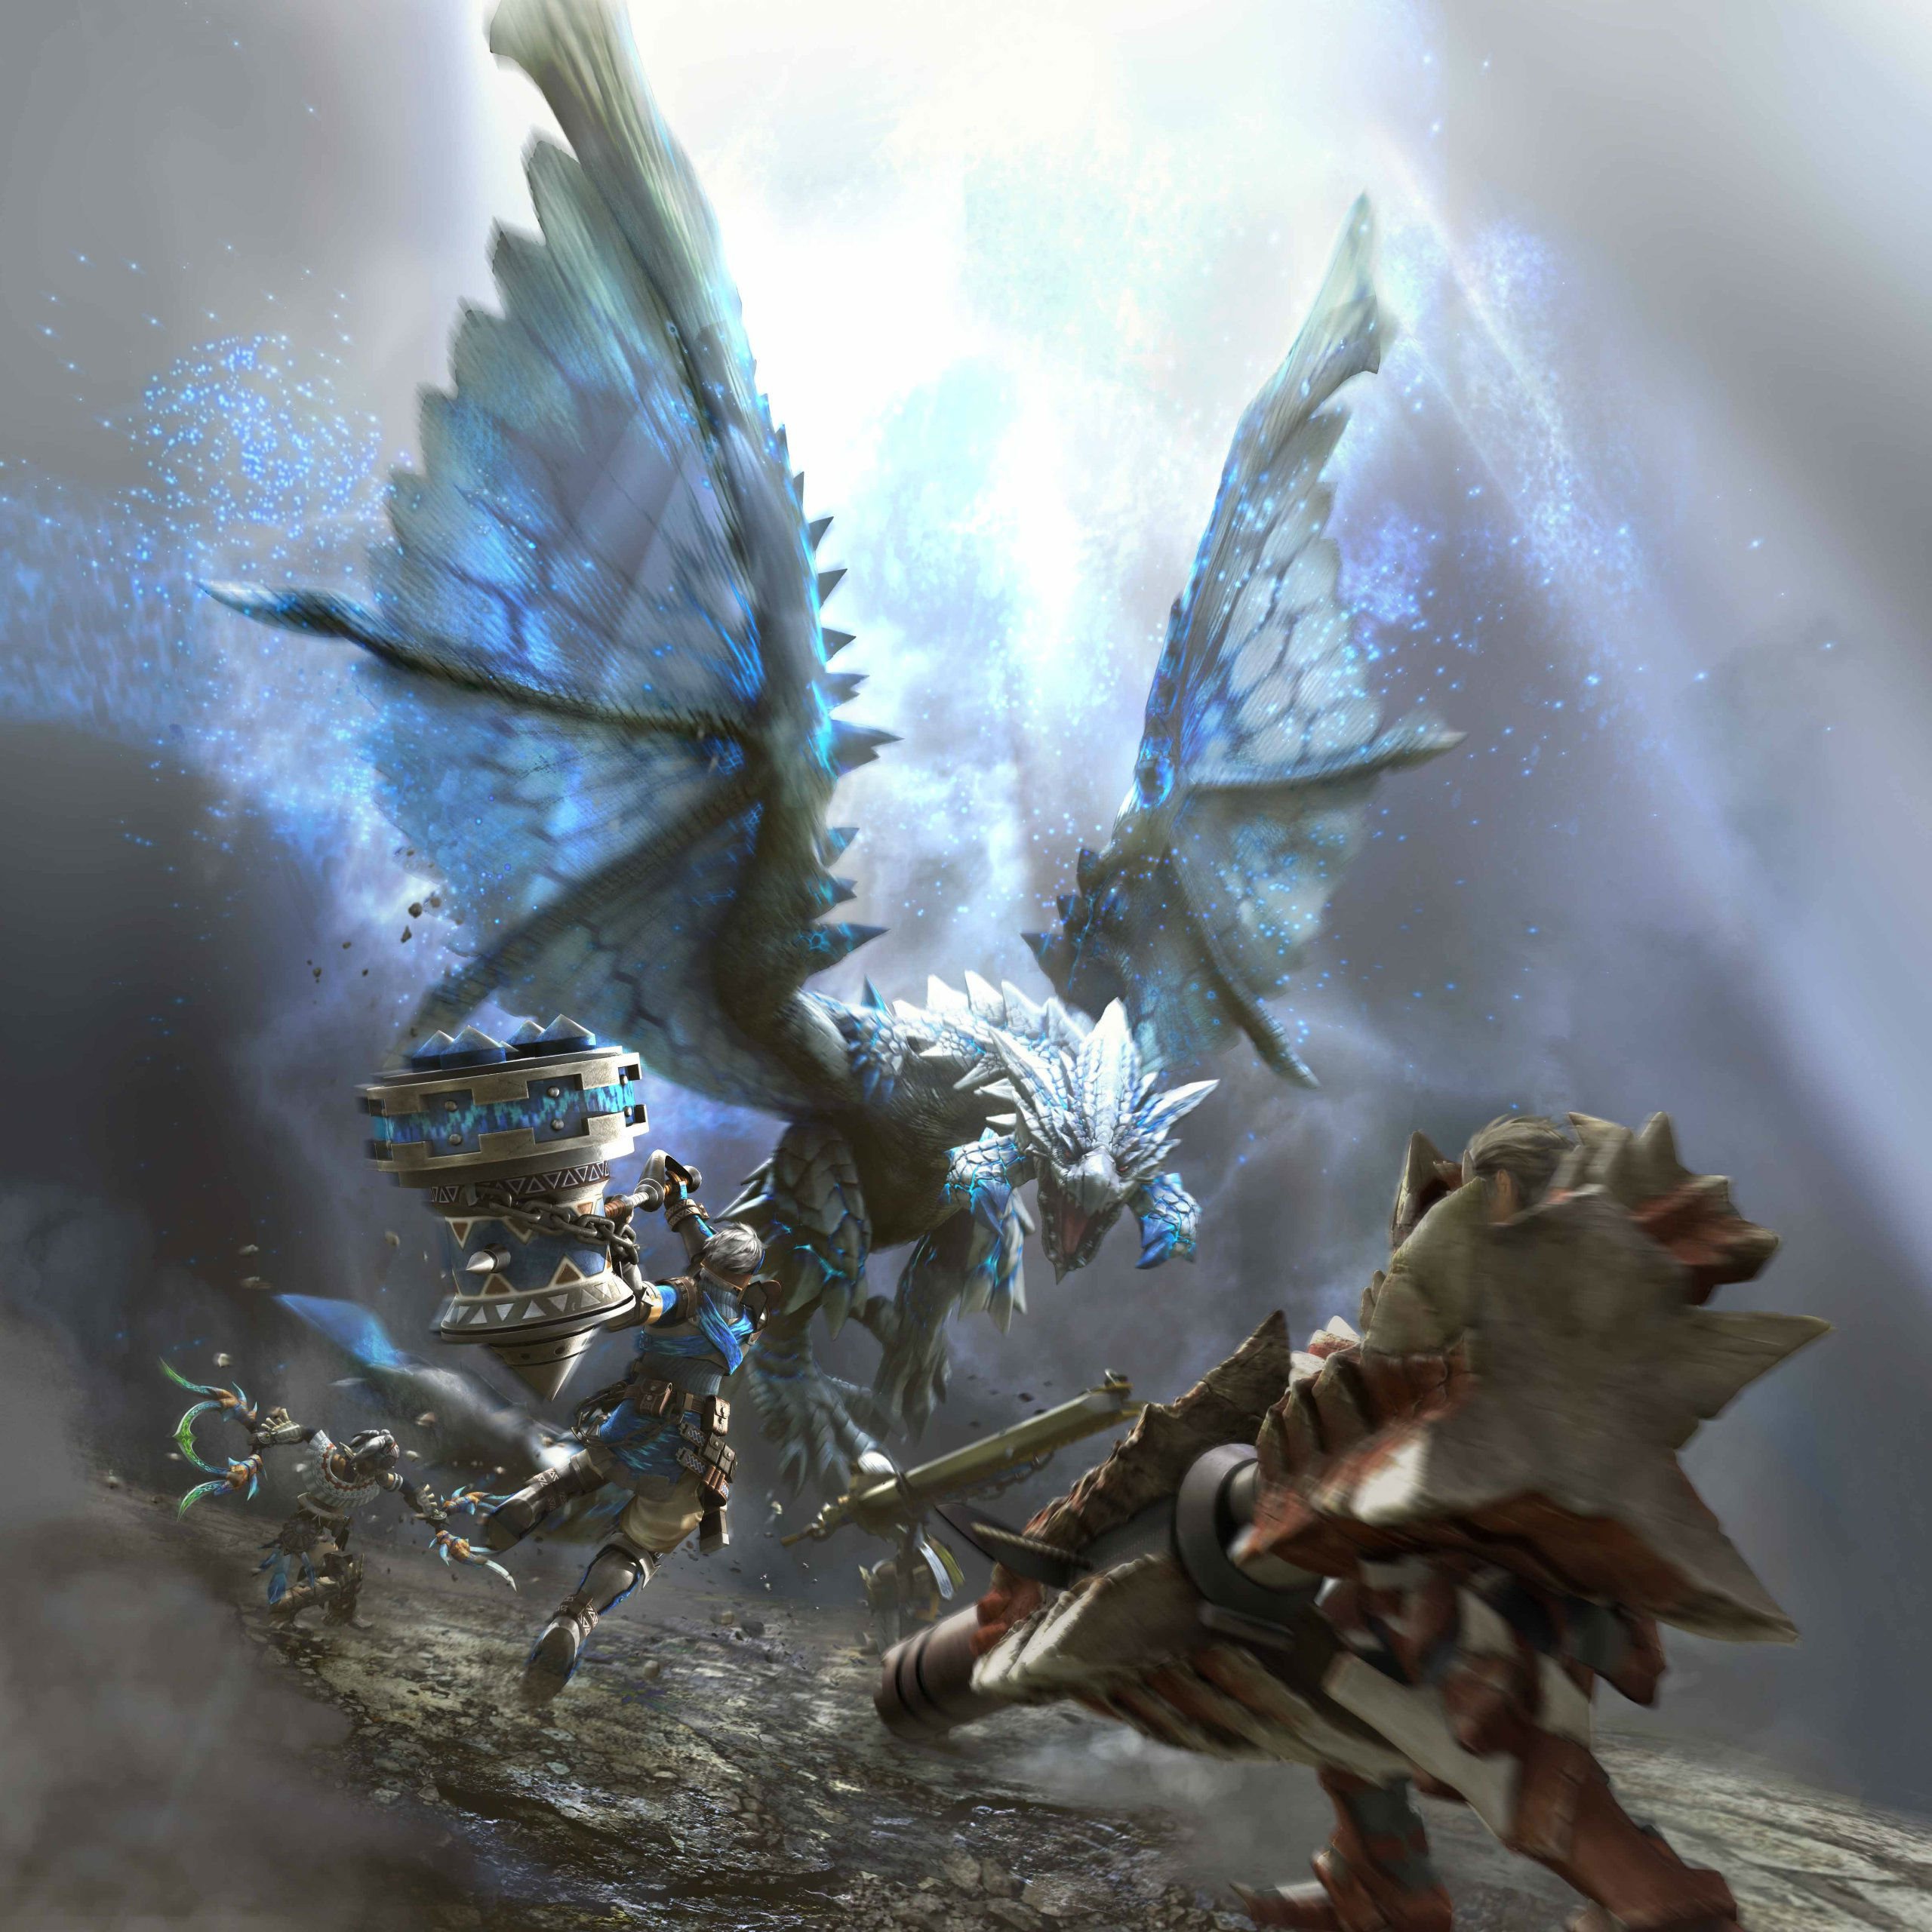 1mhf 2560x2560 px action anime dinosaur dragon fantasy Fighting Hunter Hunting mmo High Quality Wallpaper, High Definition Wallpaper